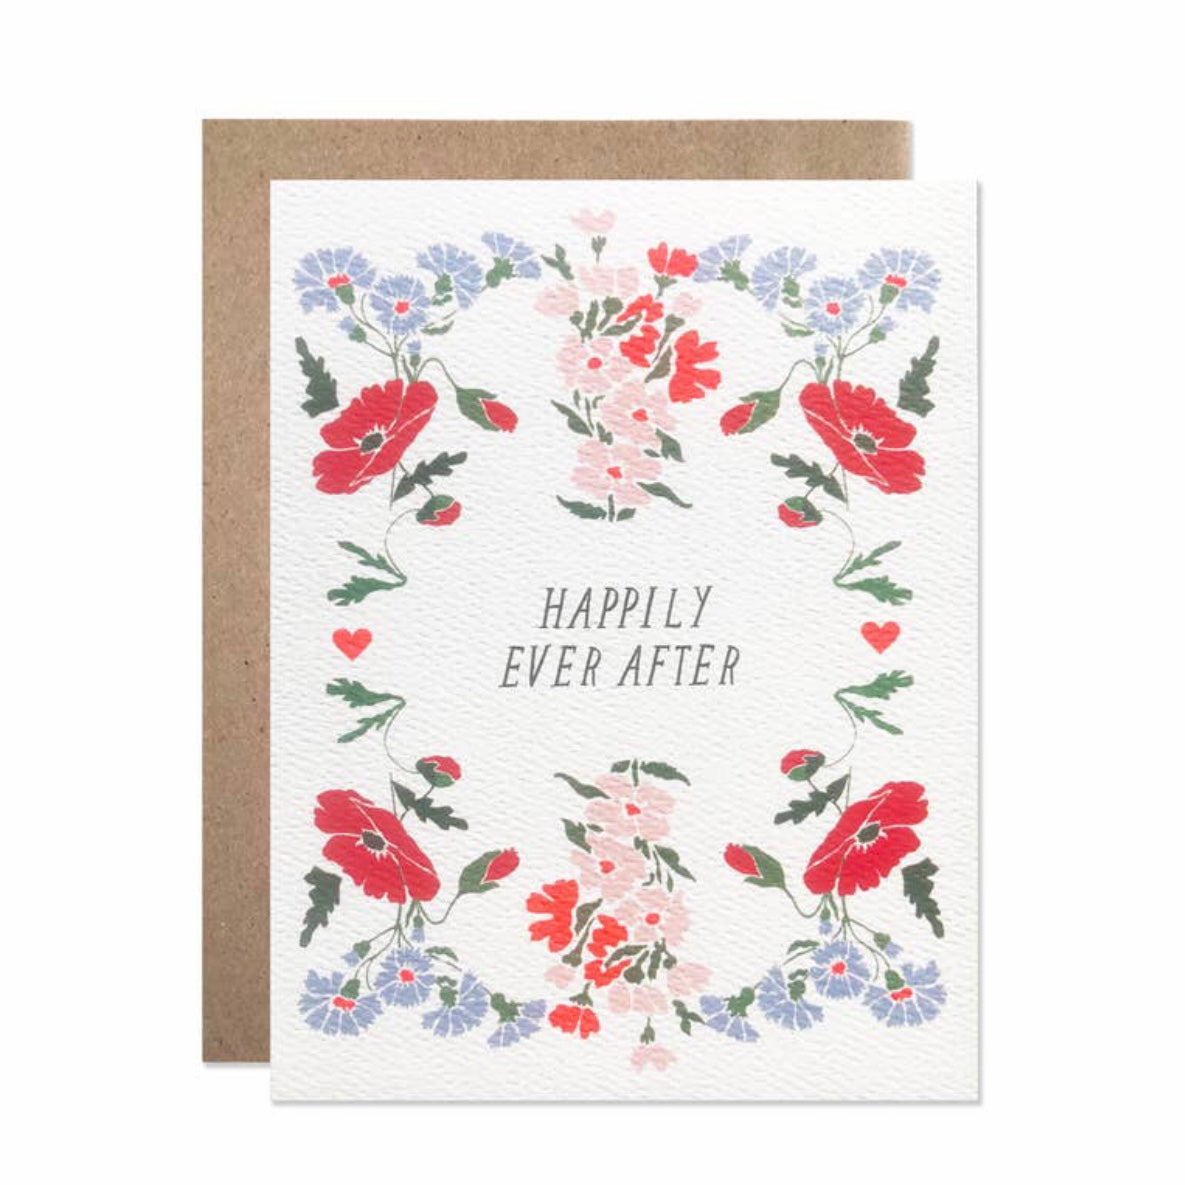 Happily ever after greeting card